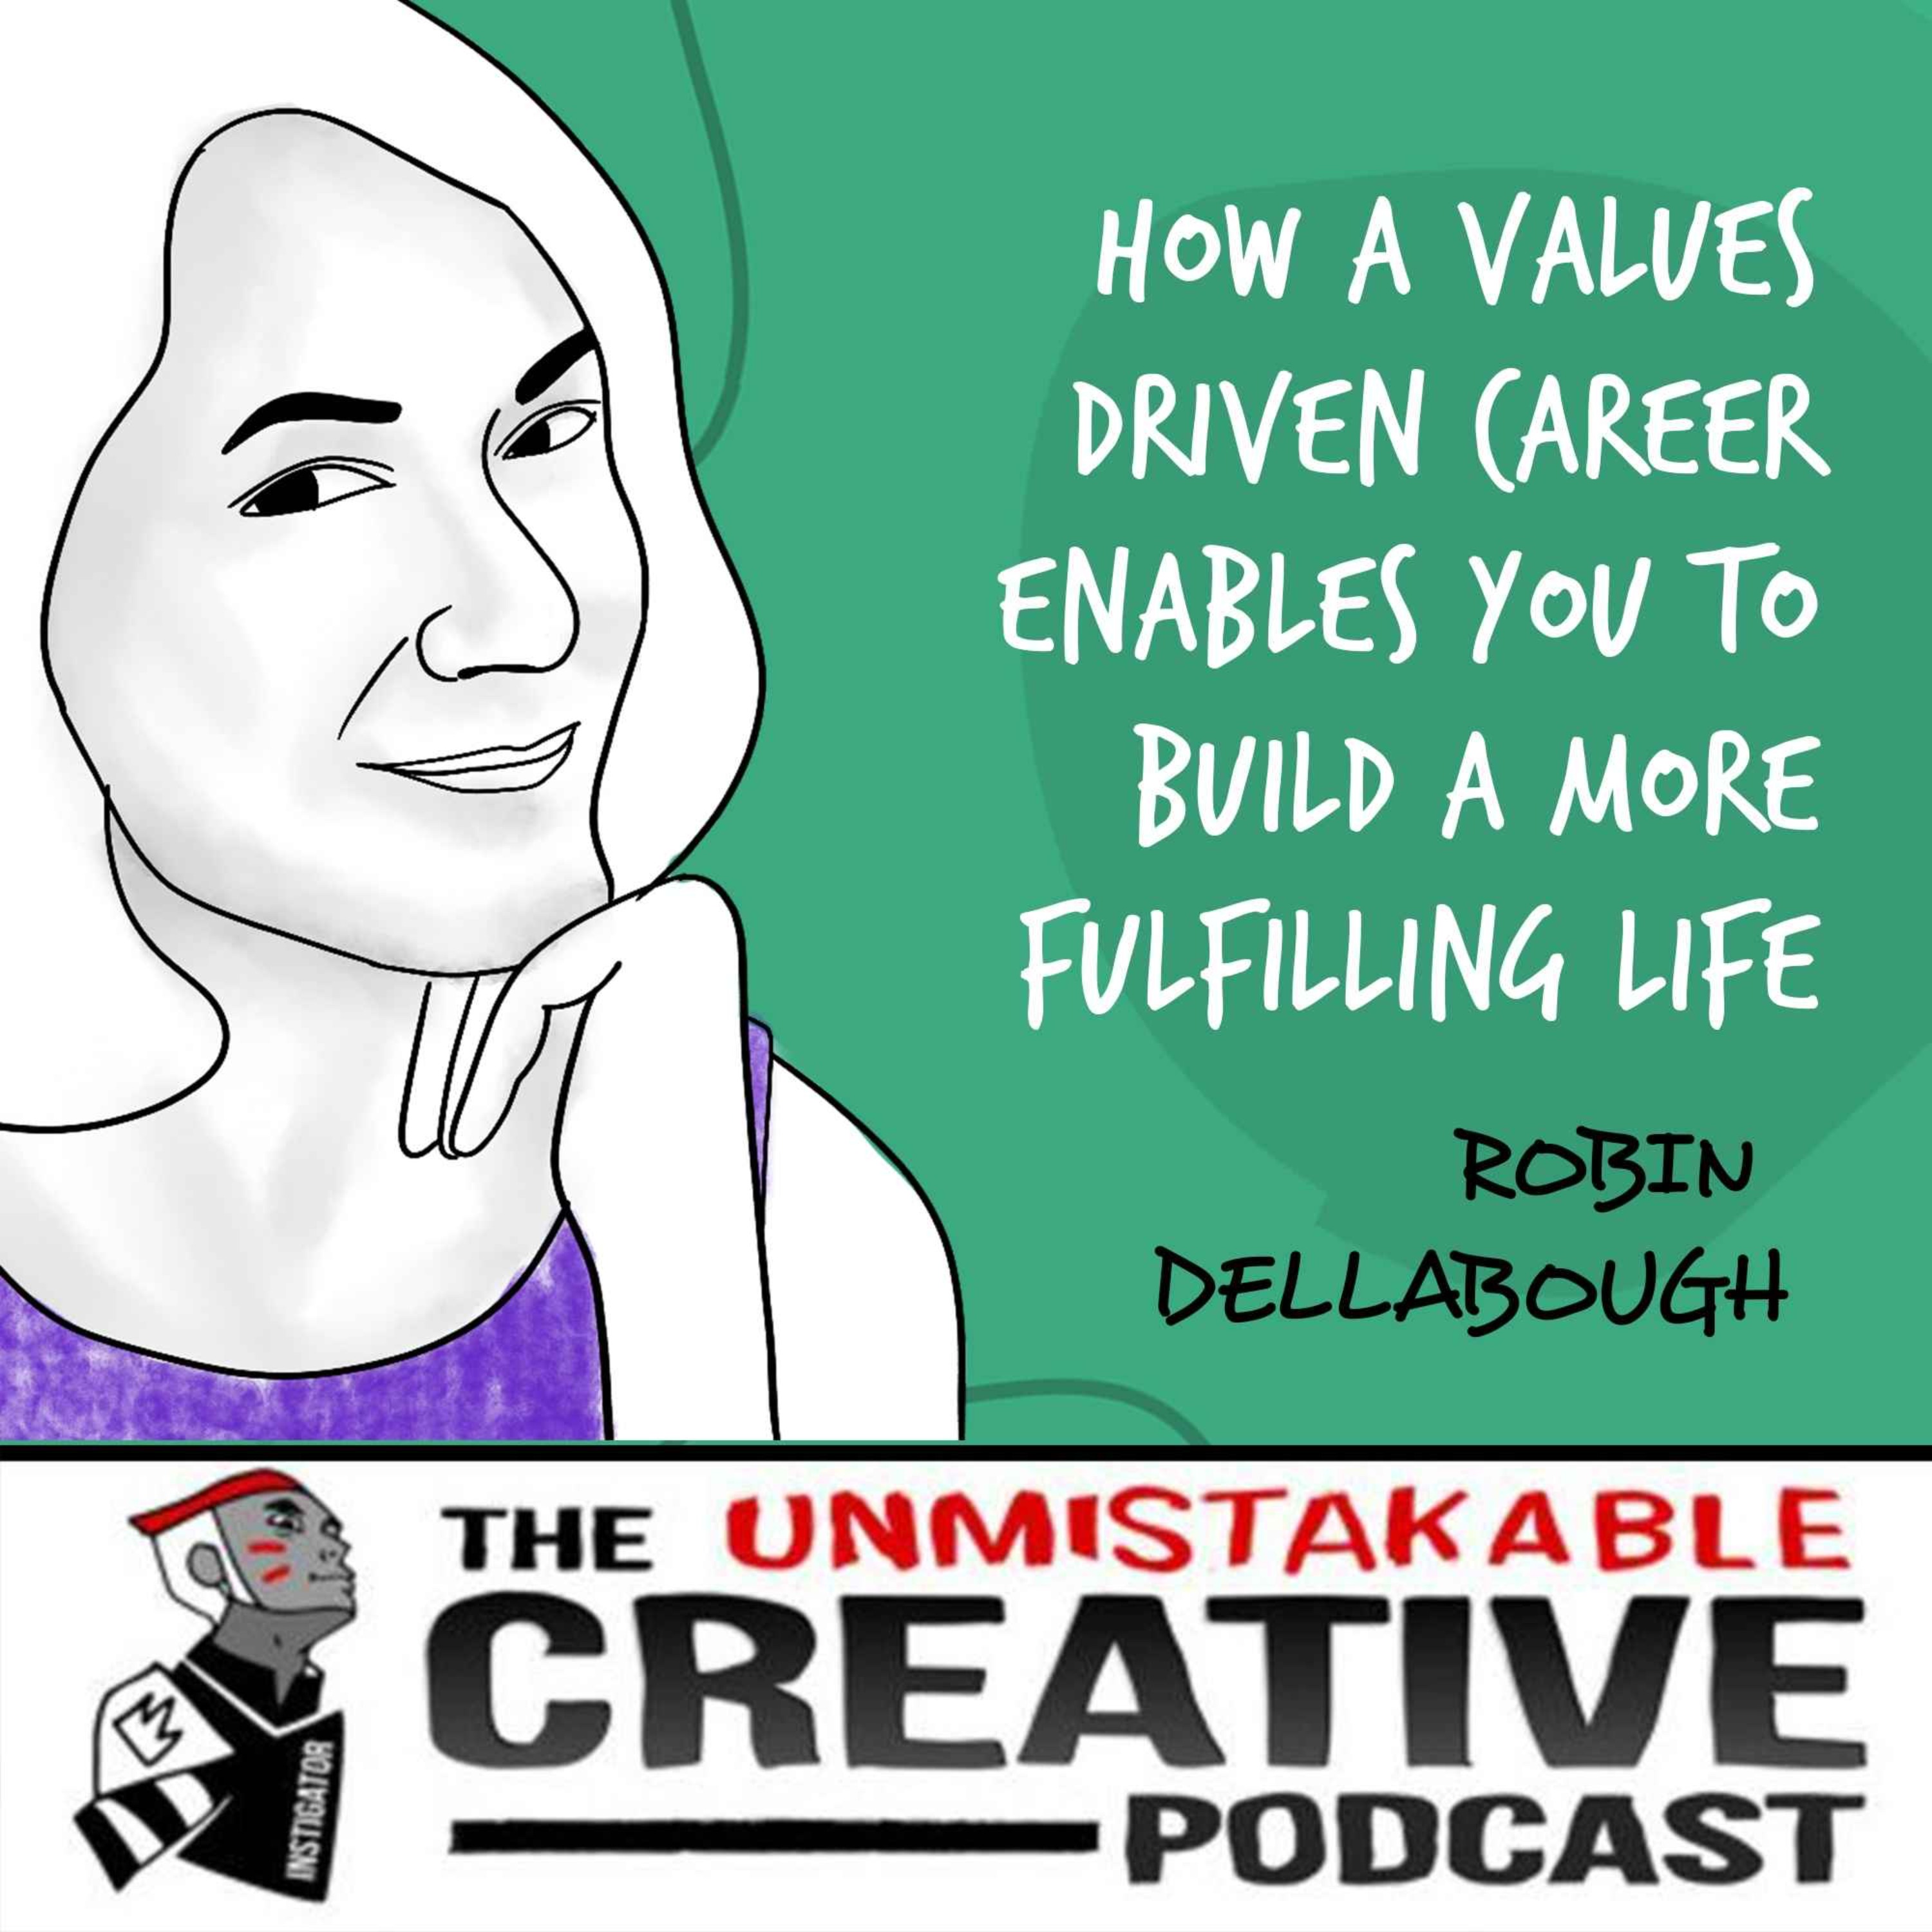 Robin Dellabough | How a Values Driven Career Enables you To Build a More Fulfilling Life